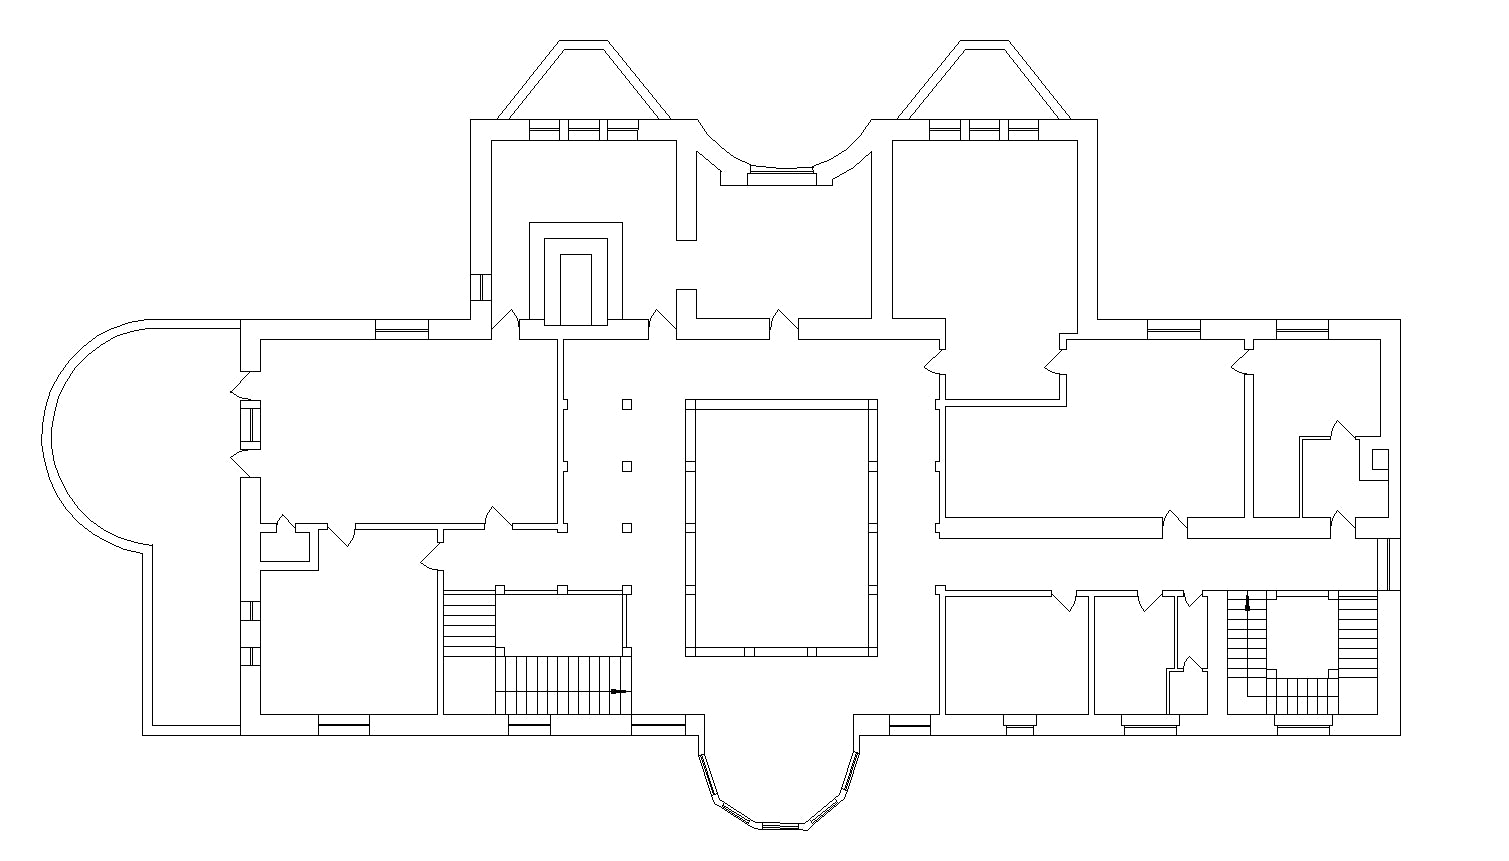 【Famous Architecture Project】Stoclet Palace-Josef Hoffmann-Architectural CAD Drawings